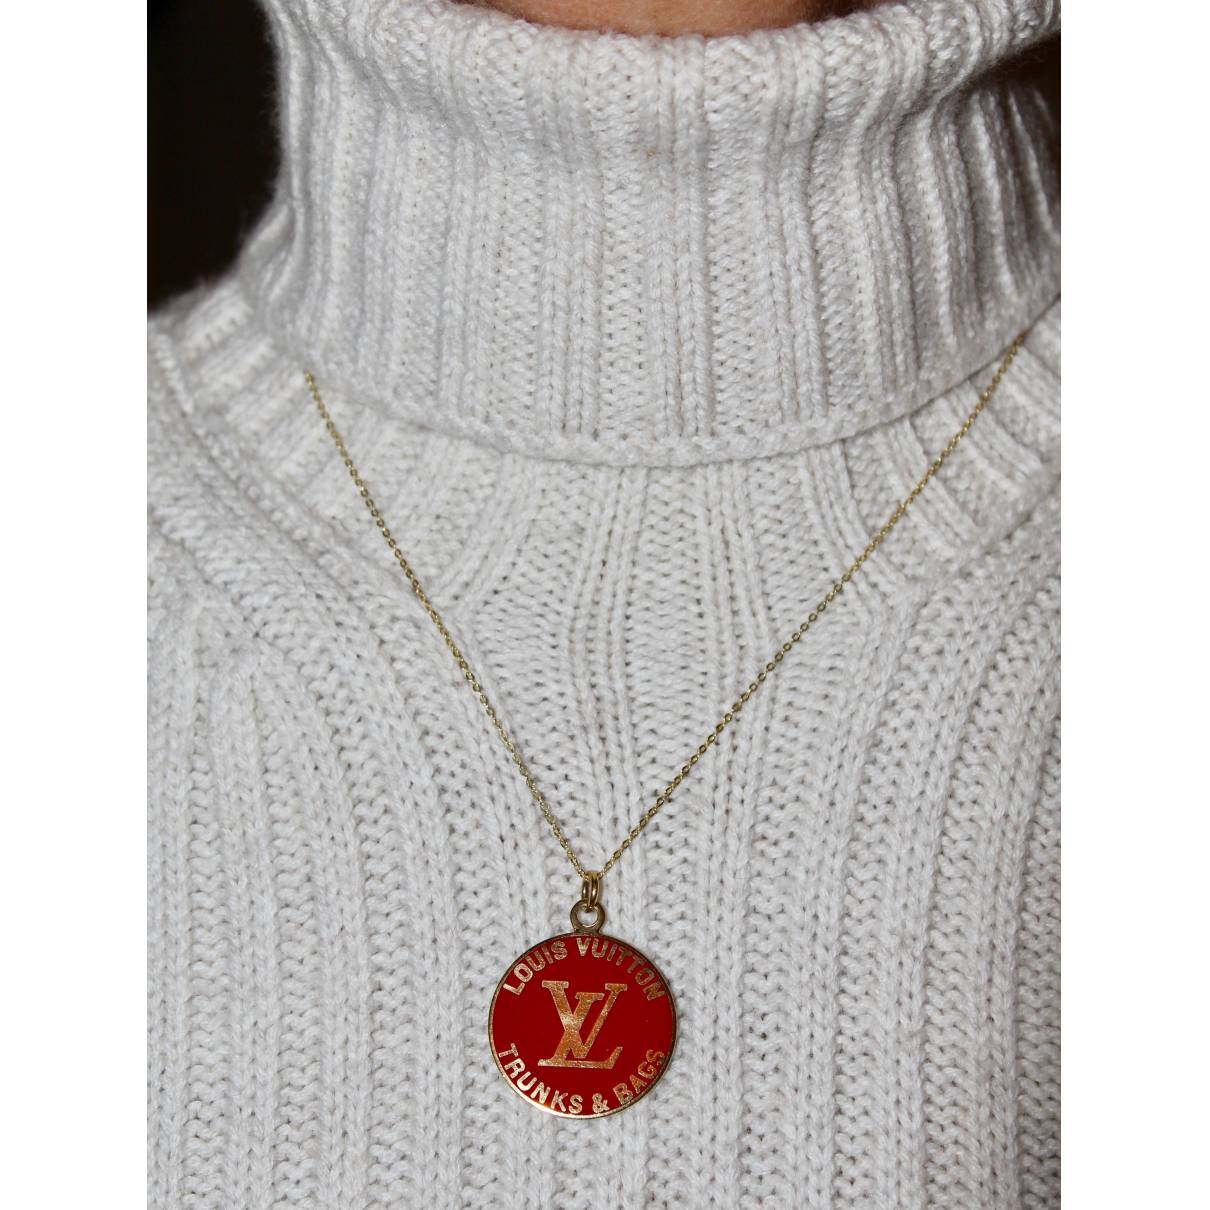 Louis Vuitton - Authenticated Necklace - Red Plain for Women, Good Condition